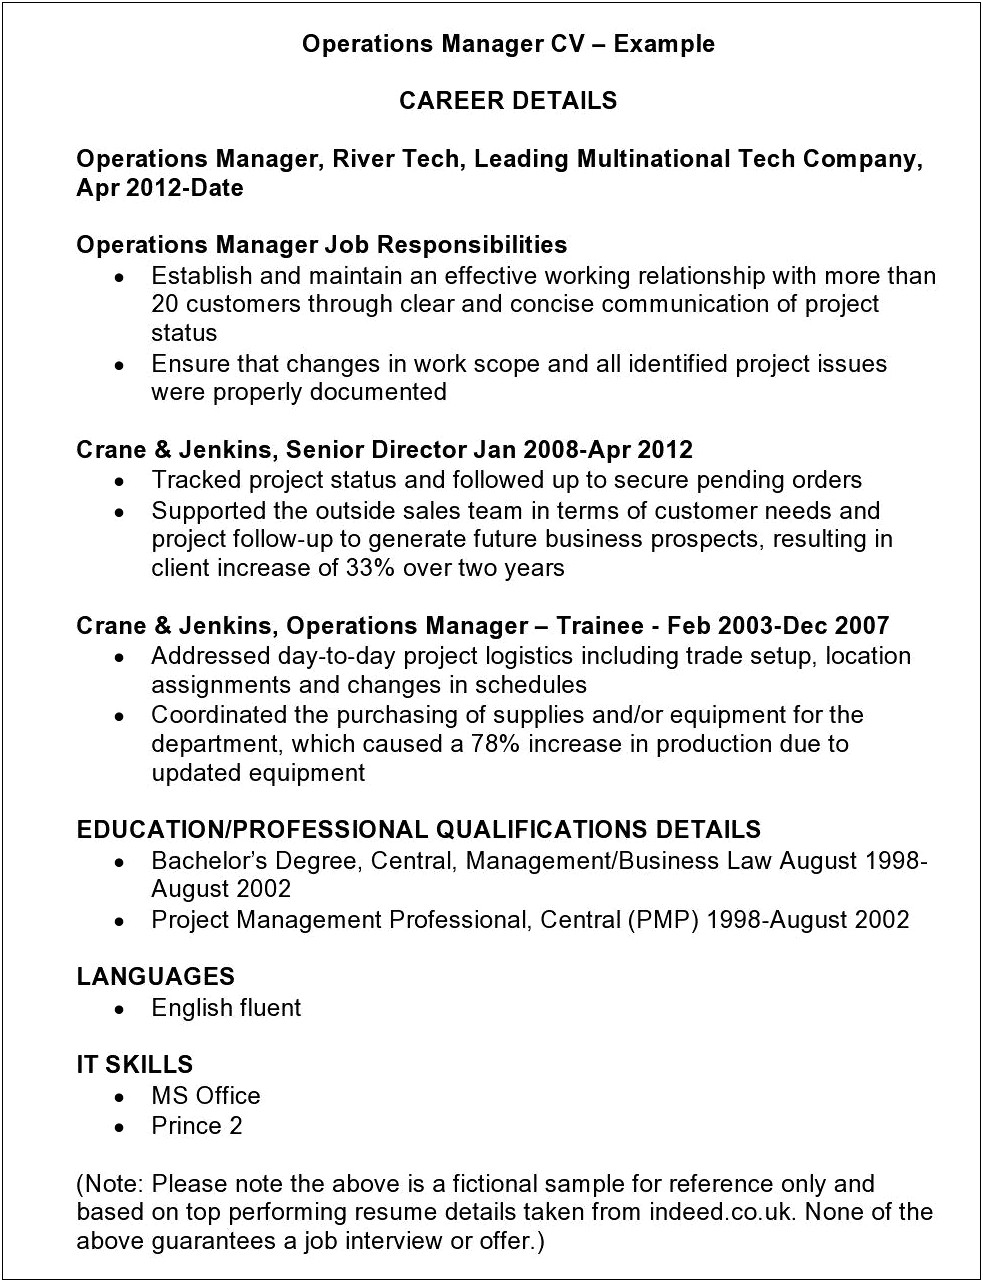 Operations Manager Job Responsibilities Resume